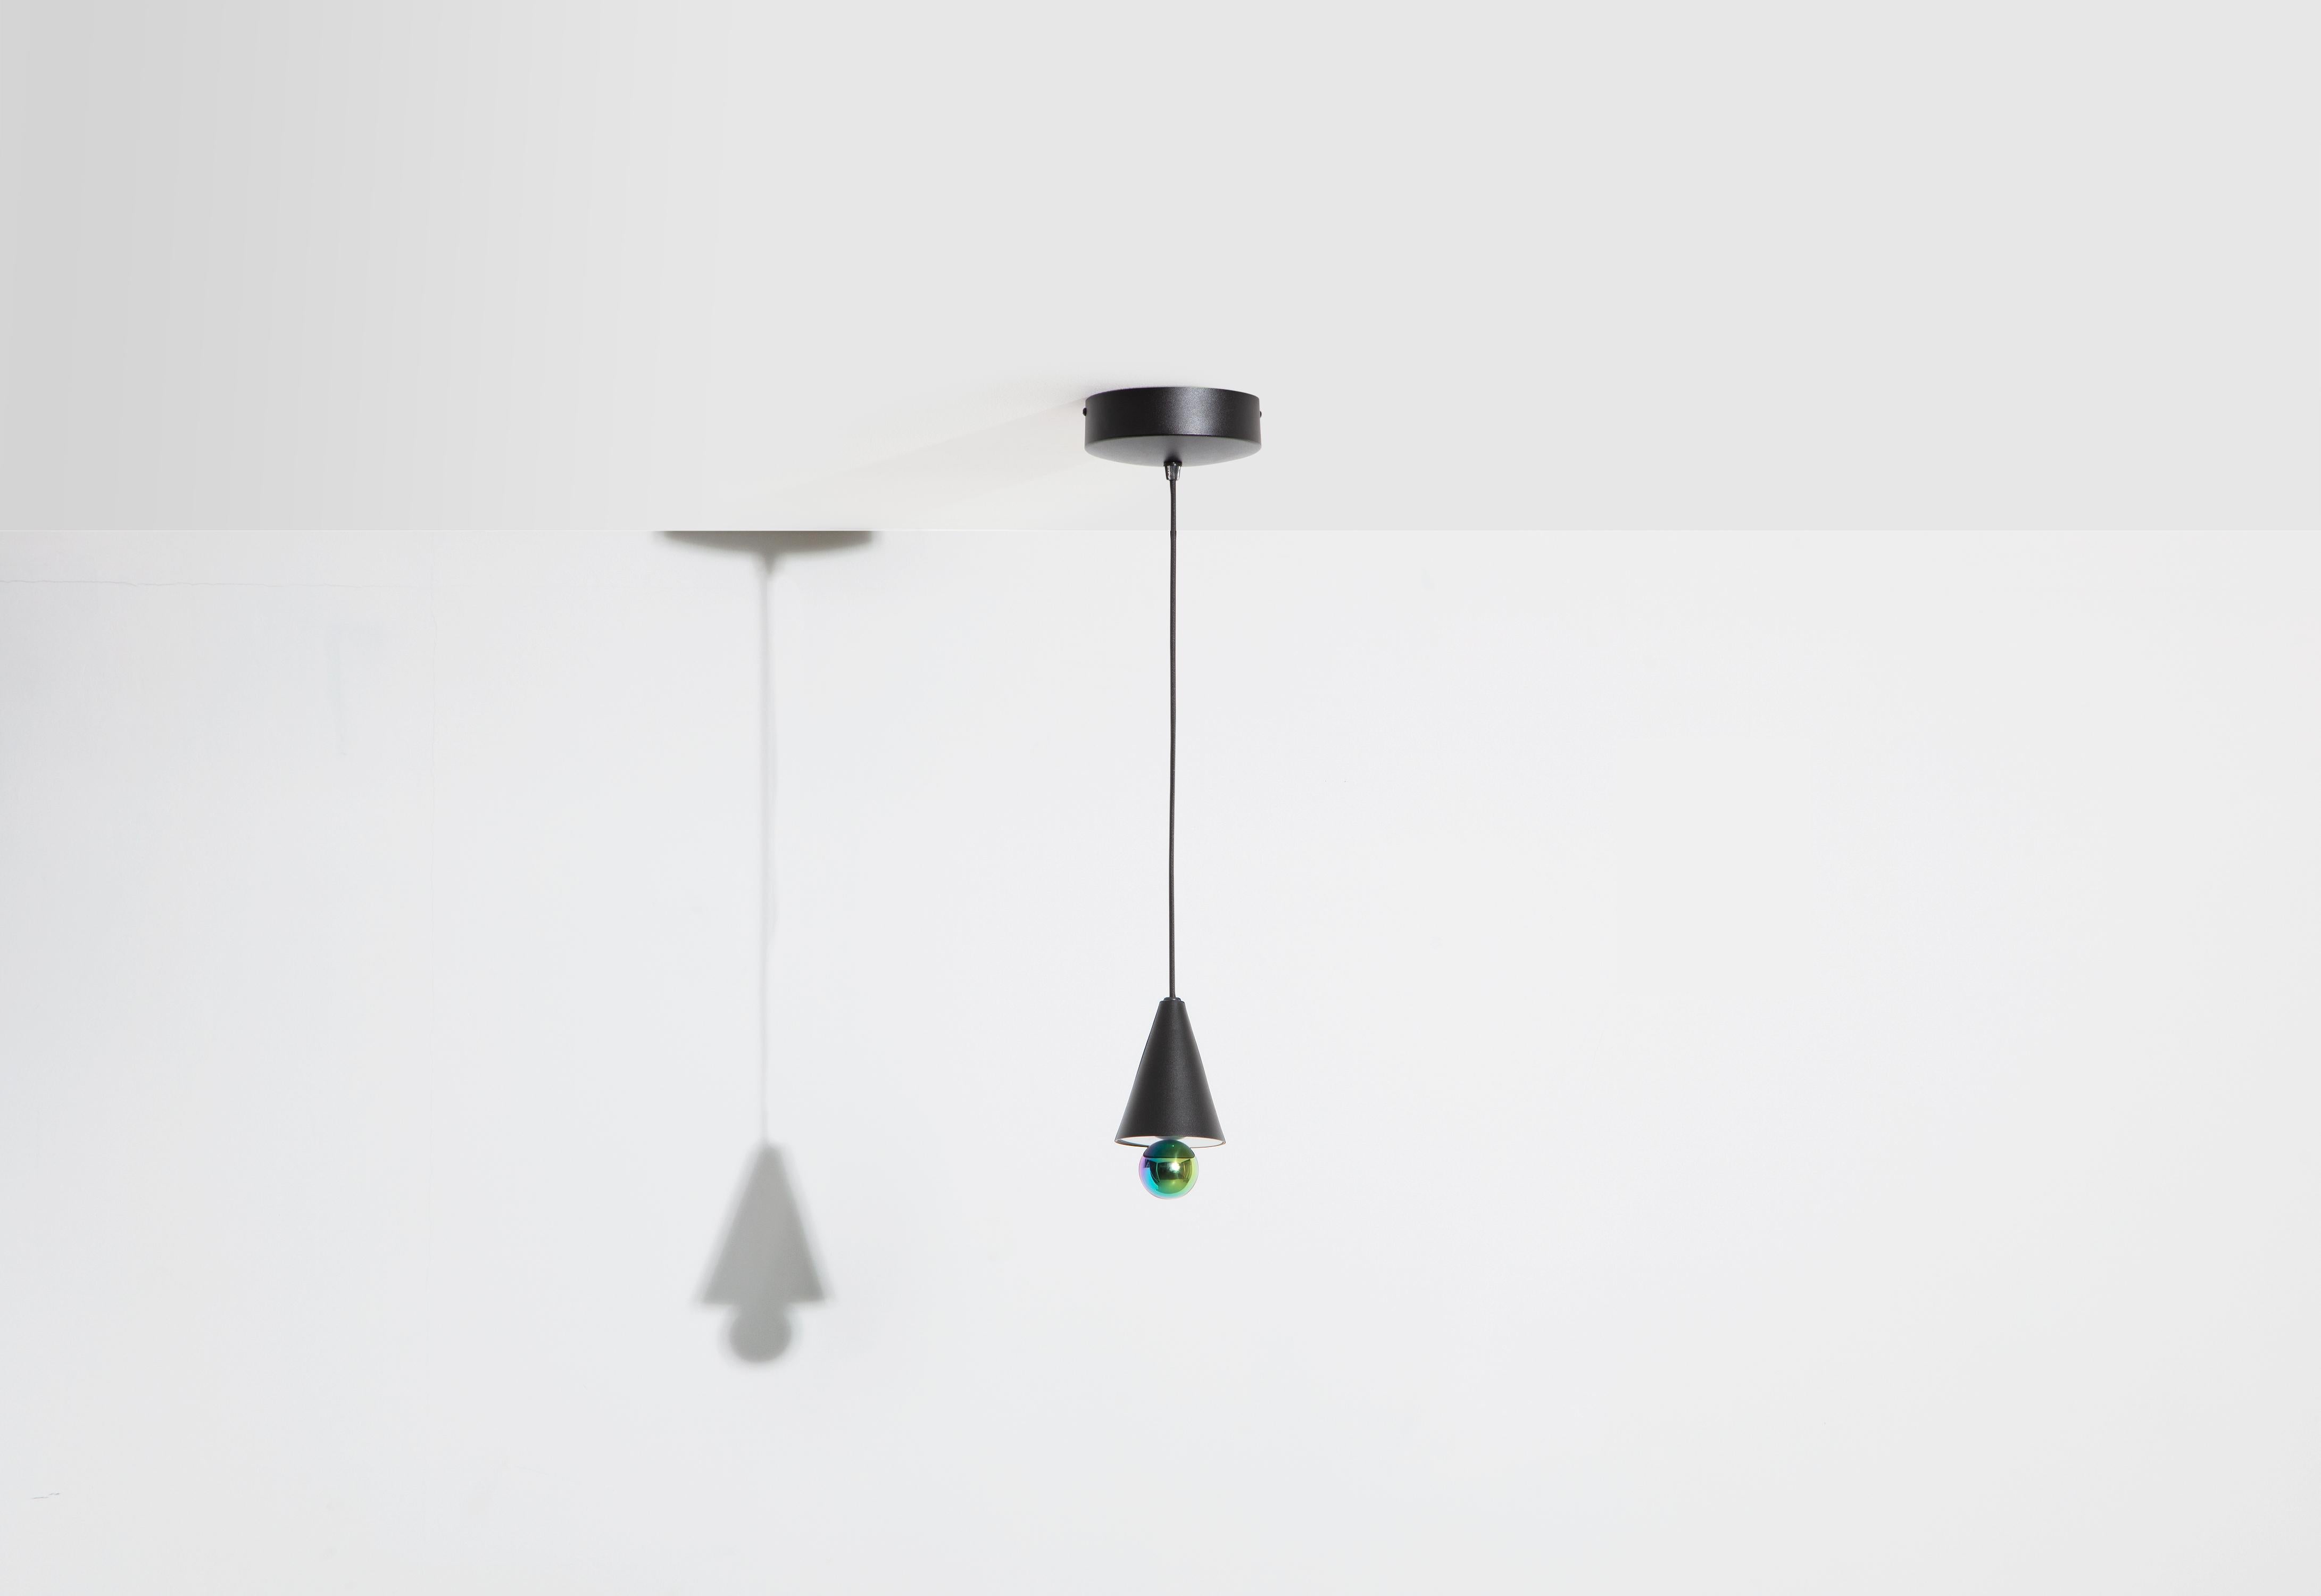 Petite Friture XS Cherry LED Pendant Light in Black & Rainbow Aluminium by Daniel and Emma, 2020

In 2015, the Australian duo designers Daniel and Emma signed Cherry a simple and minimalist pendant lamp design ; an aluminum cone with a bottomed